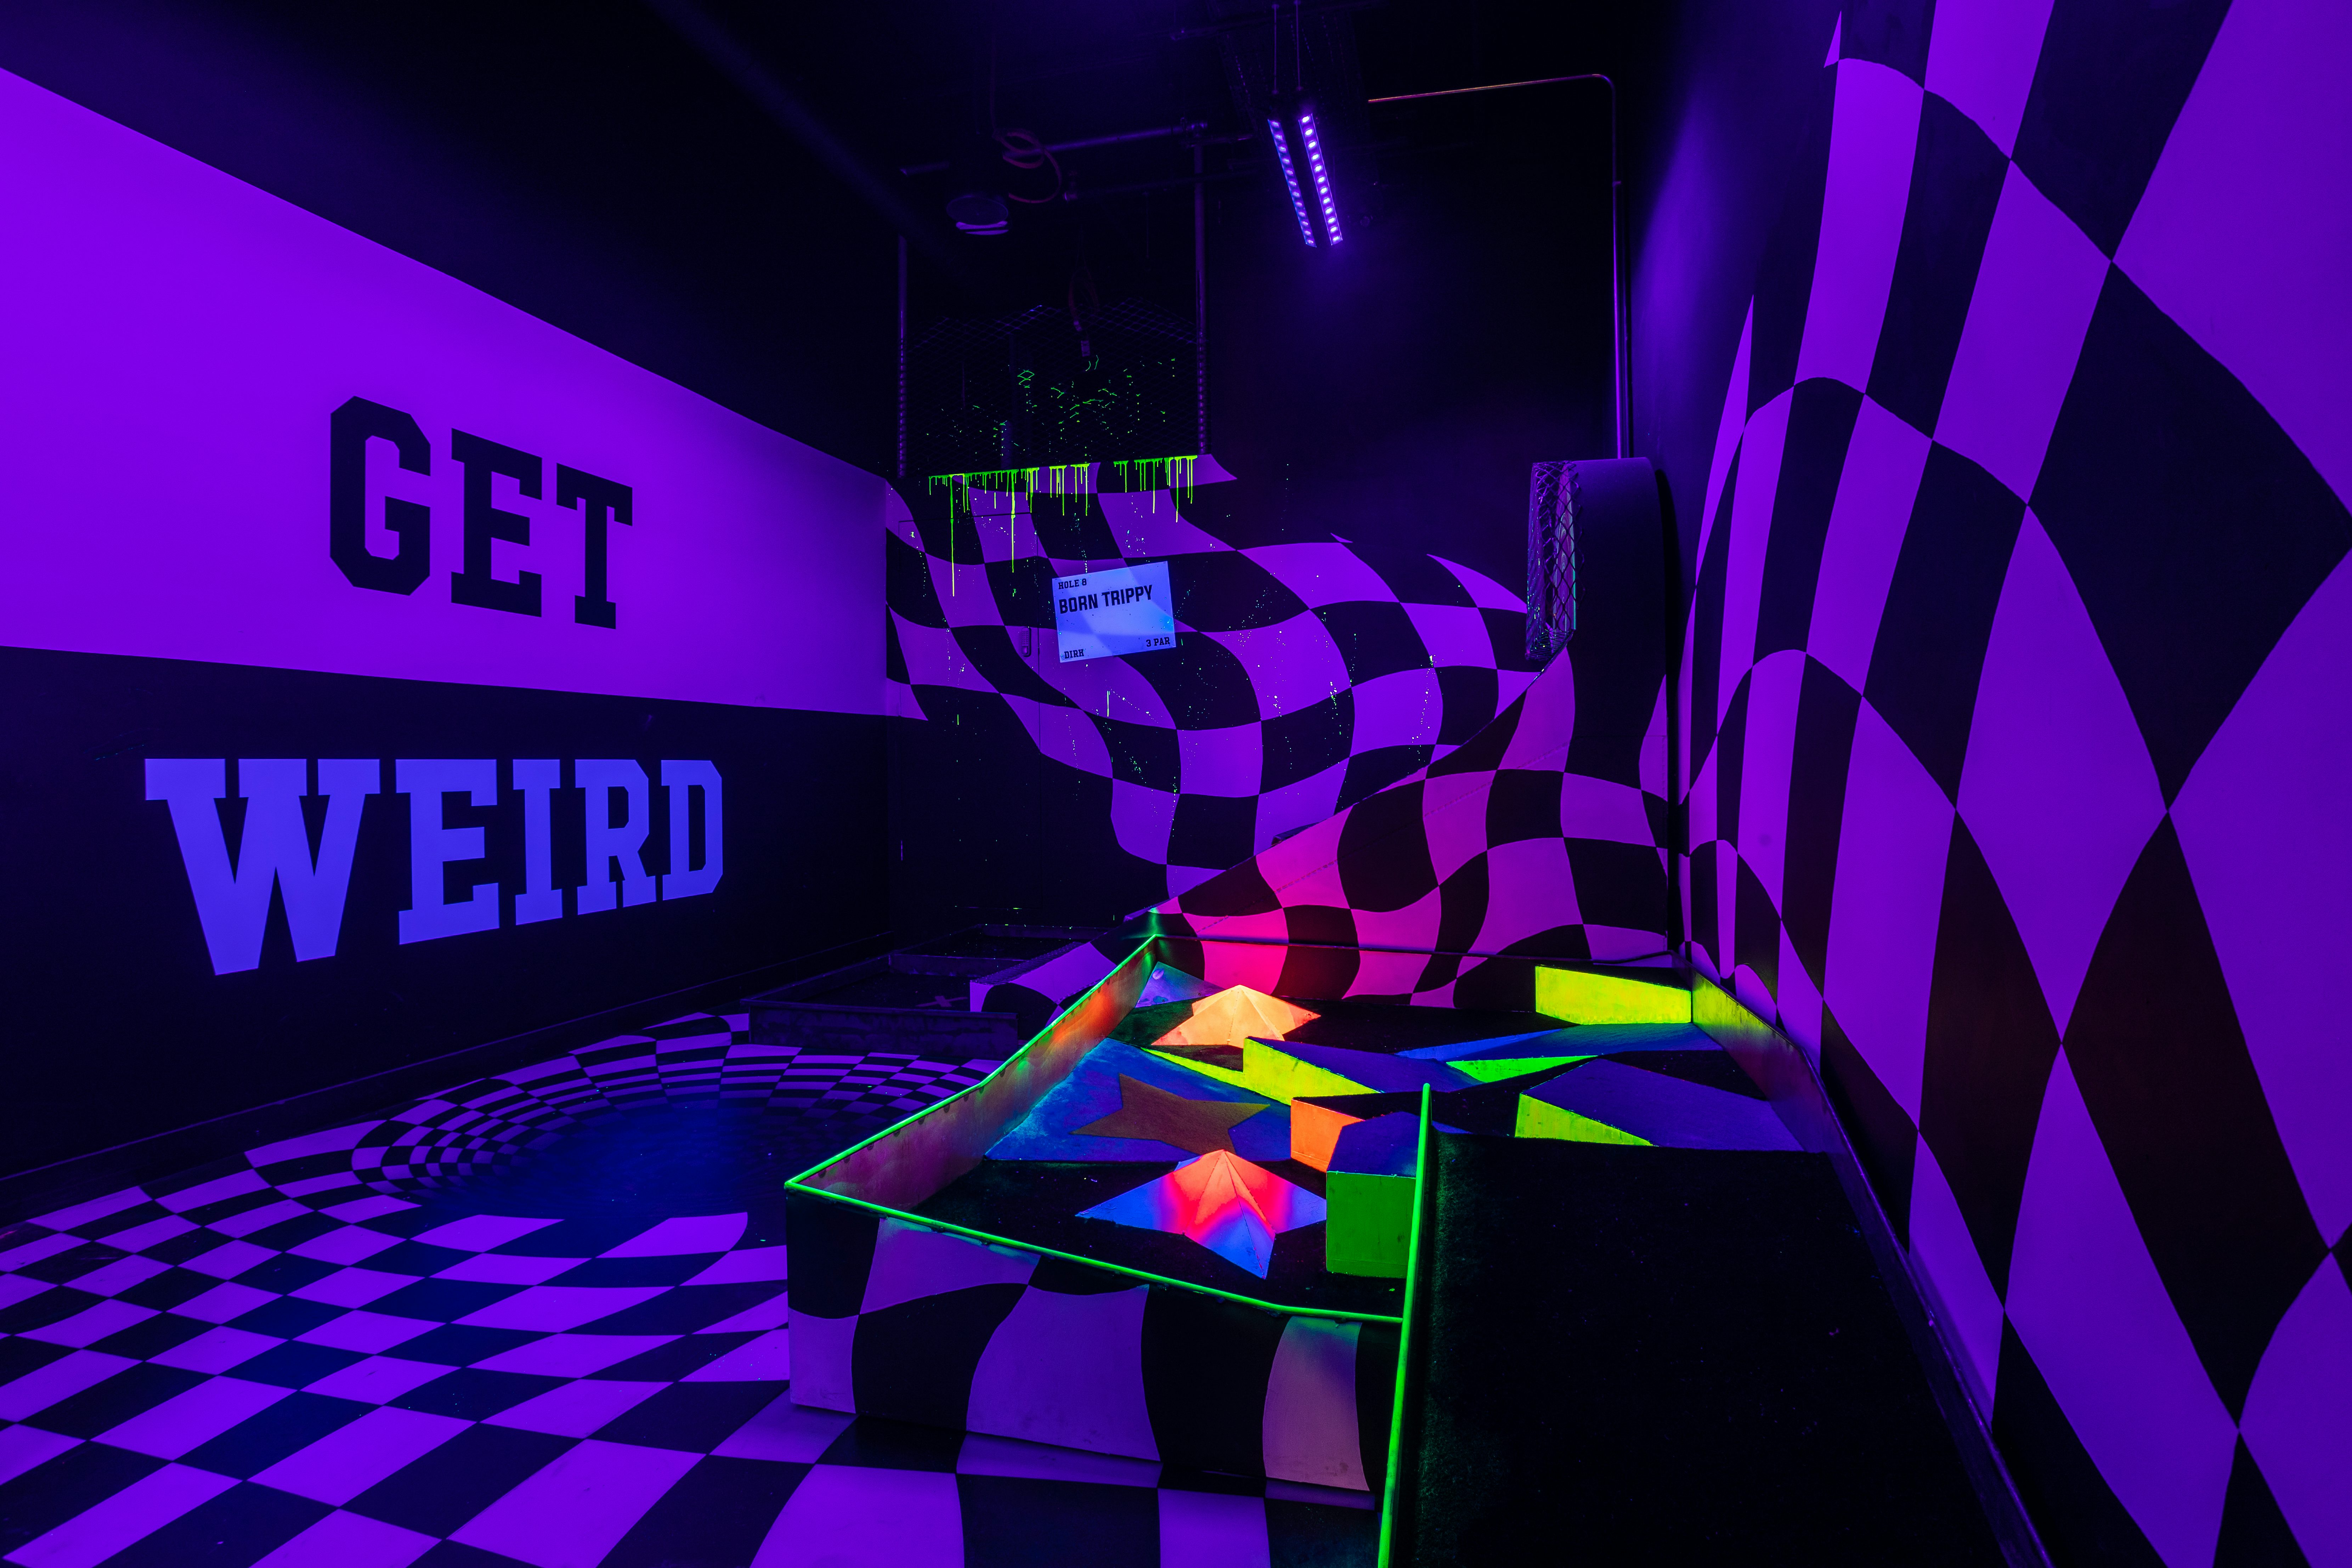 Junkyard Golf Club on X: Born Trippy? Rave through the 90s on course Dirk.  Exclusive to our London Junkyard, expect big tunes, furry walls and  distorted floors 🏌️‍♀️. Book now 🔗 in